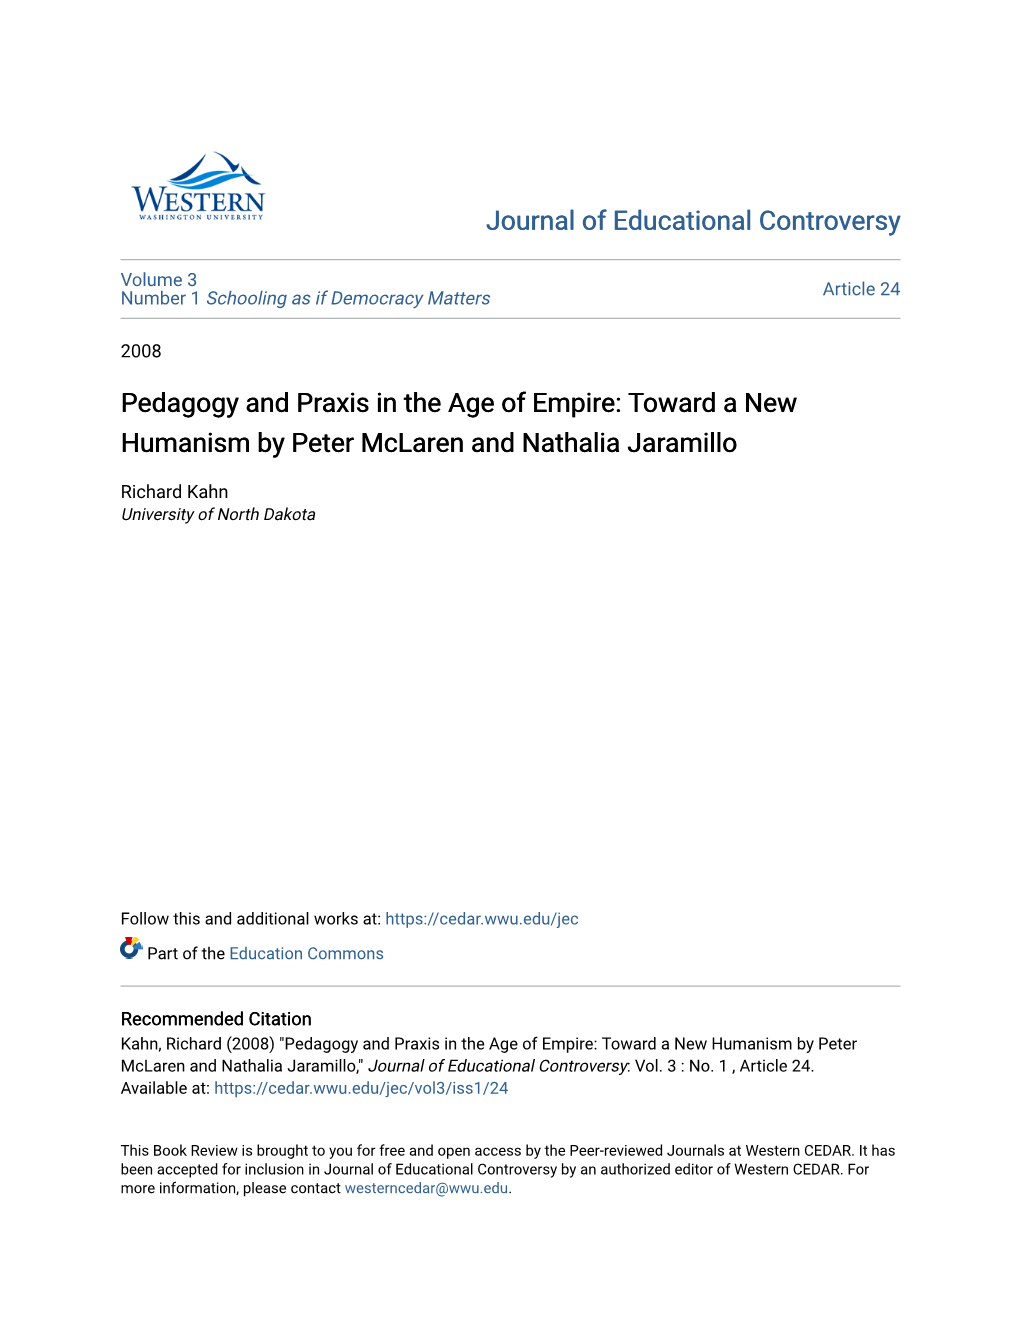 Pedagogy and Praxis in the Age of Empire: Toward a New Humanism by Peter Mclaren and Nathalia Jaramillo